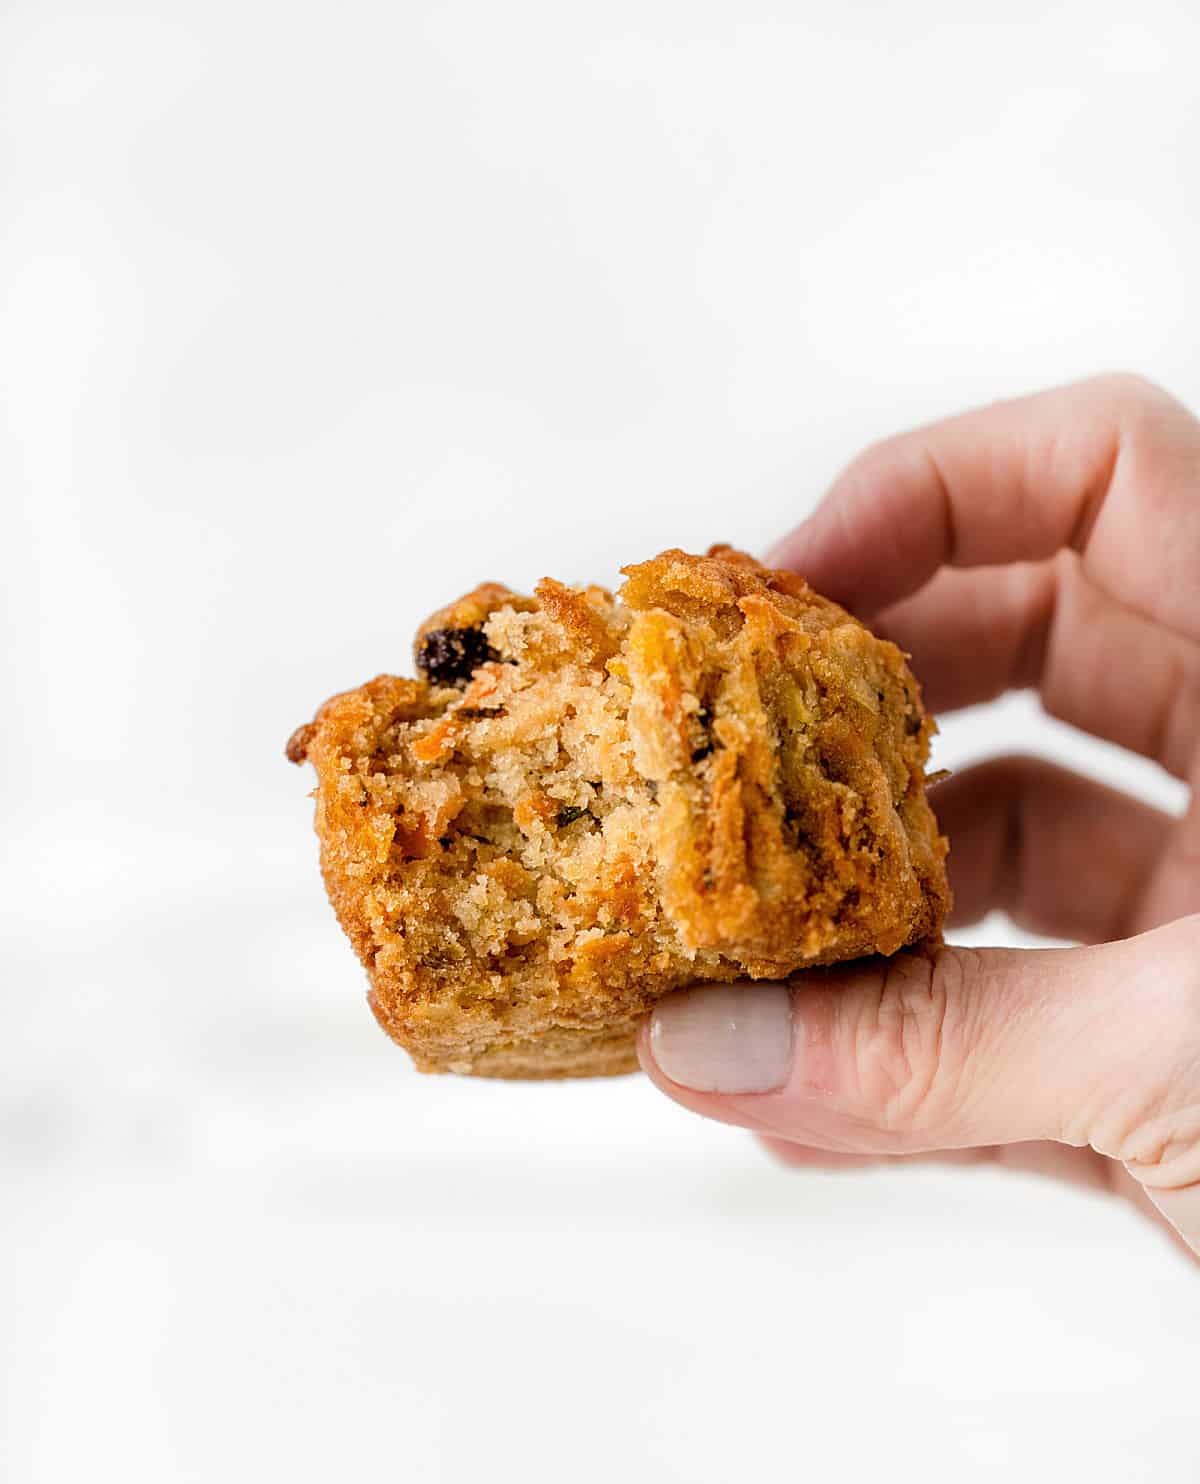 Hand holding a bitten carrot raisin muffin with a white background.